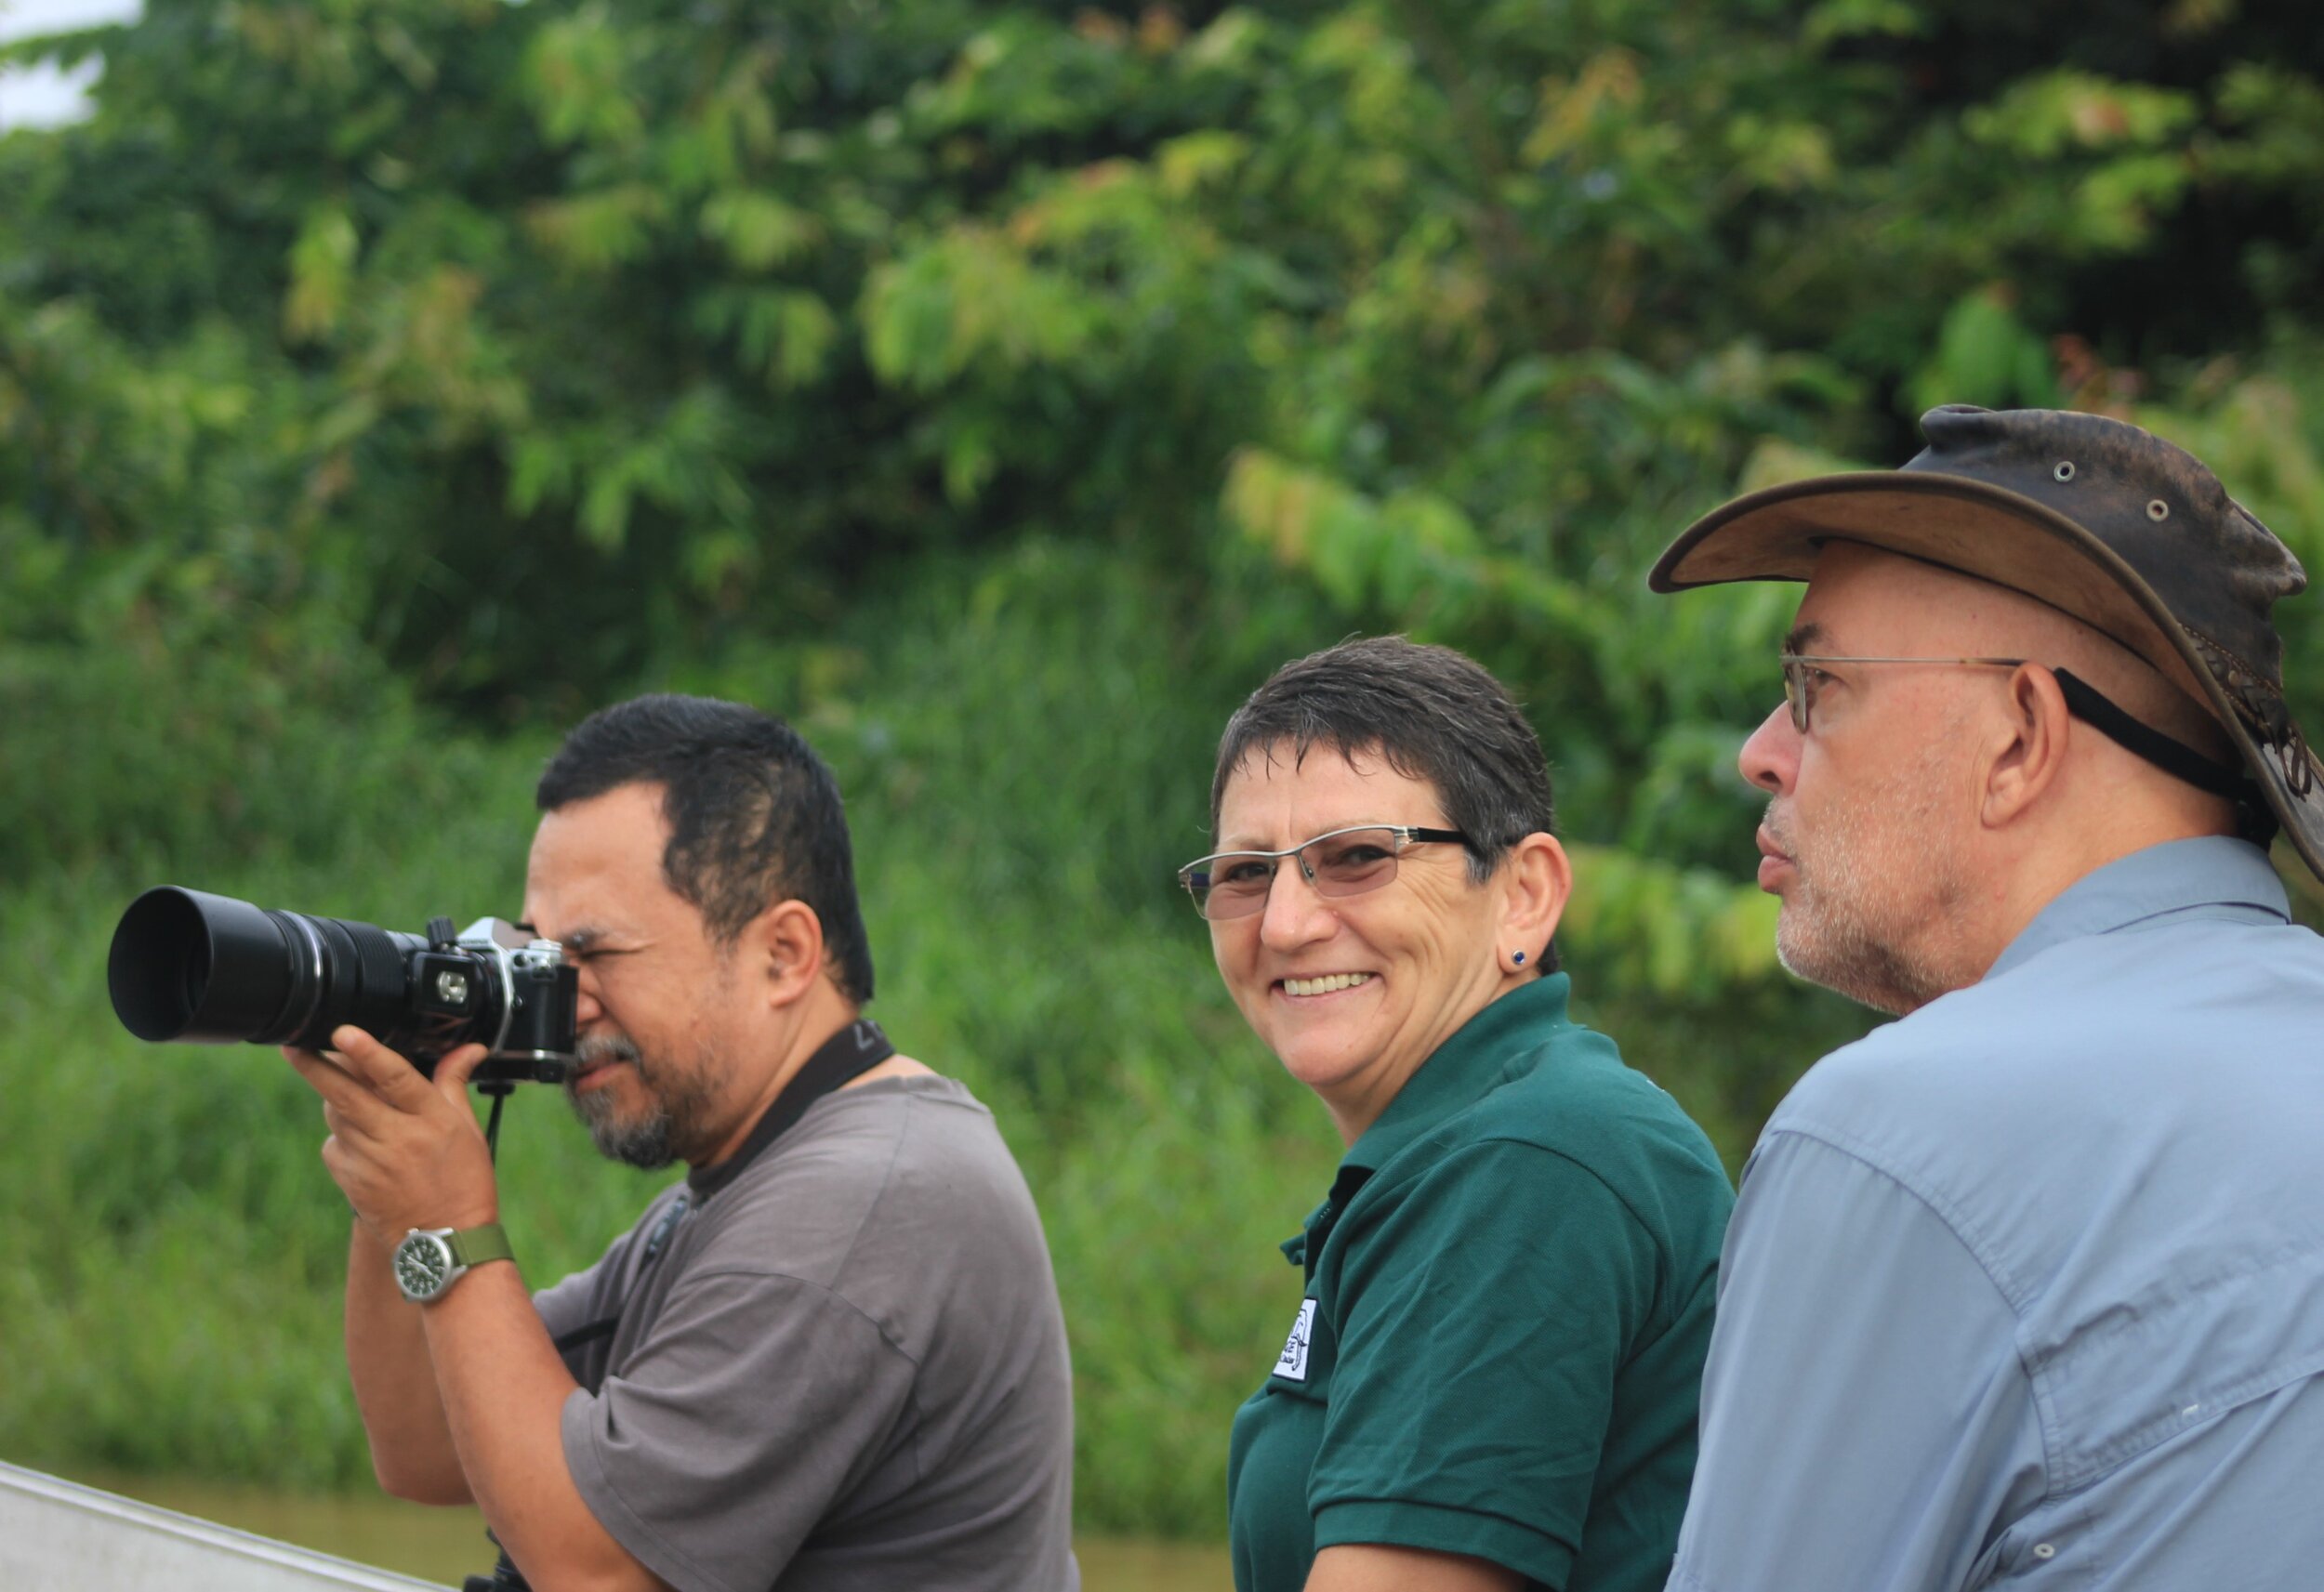 Hymeir, Francien and Berry on the look-out for elephants